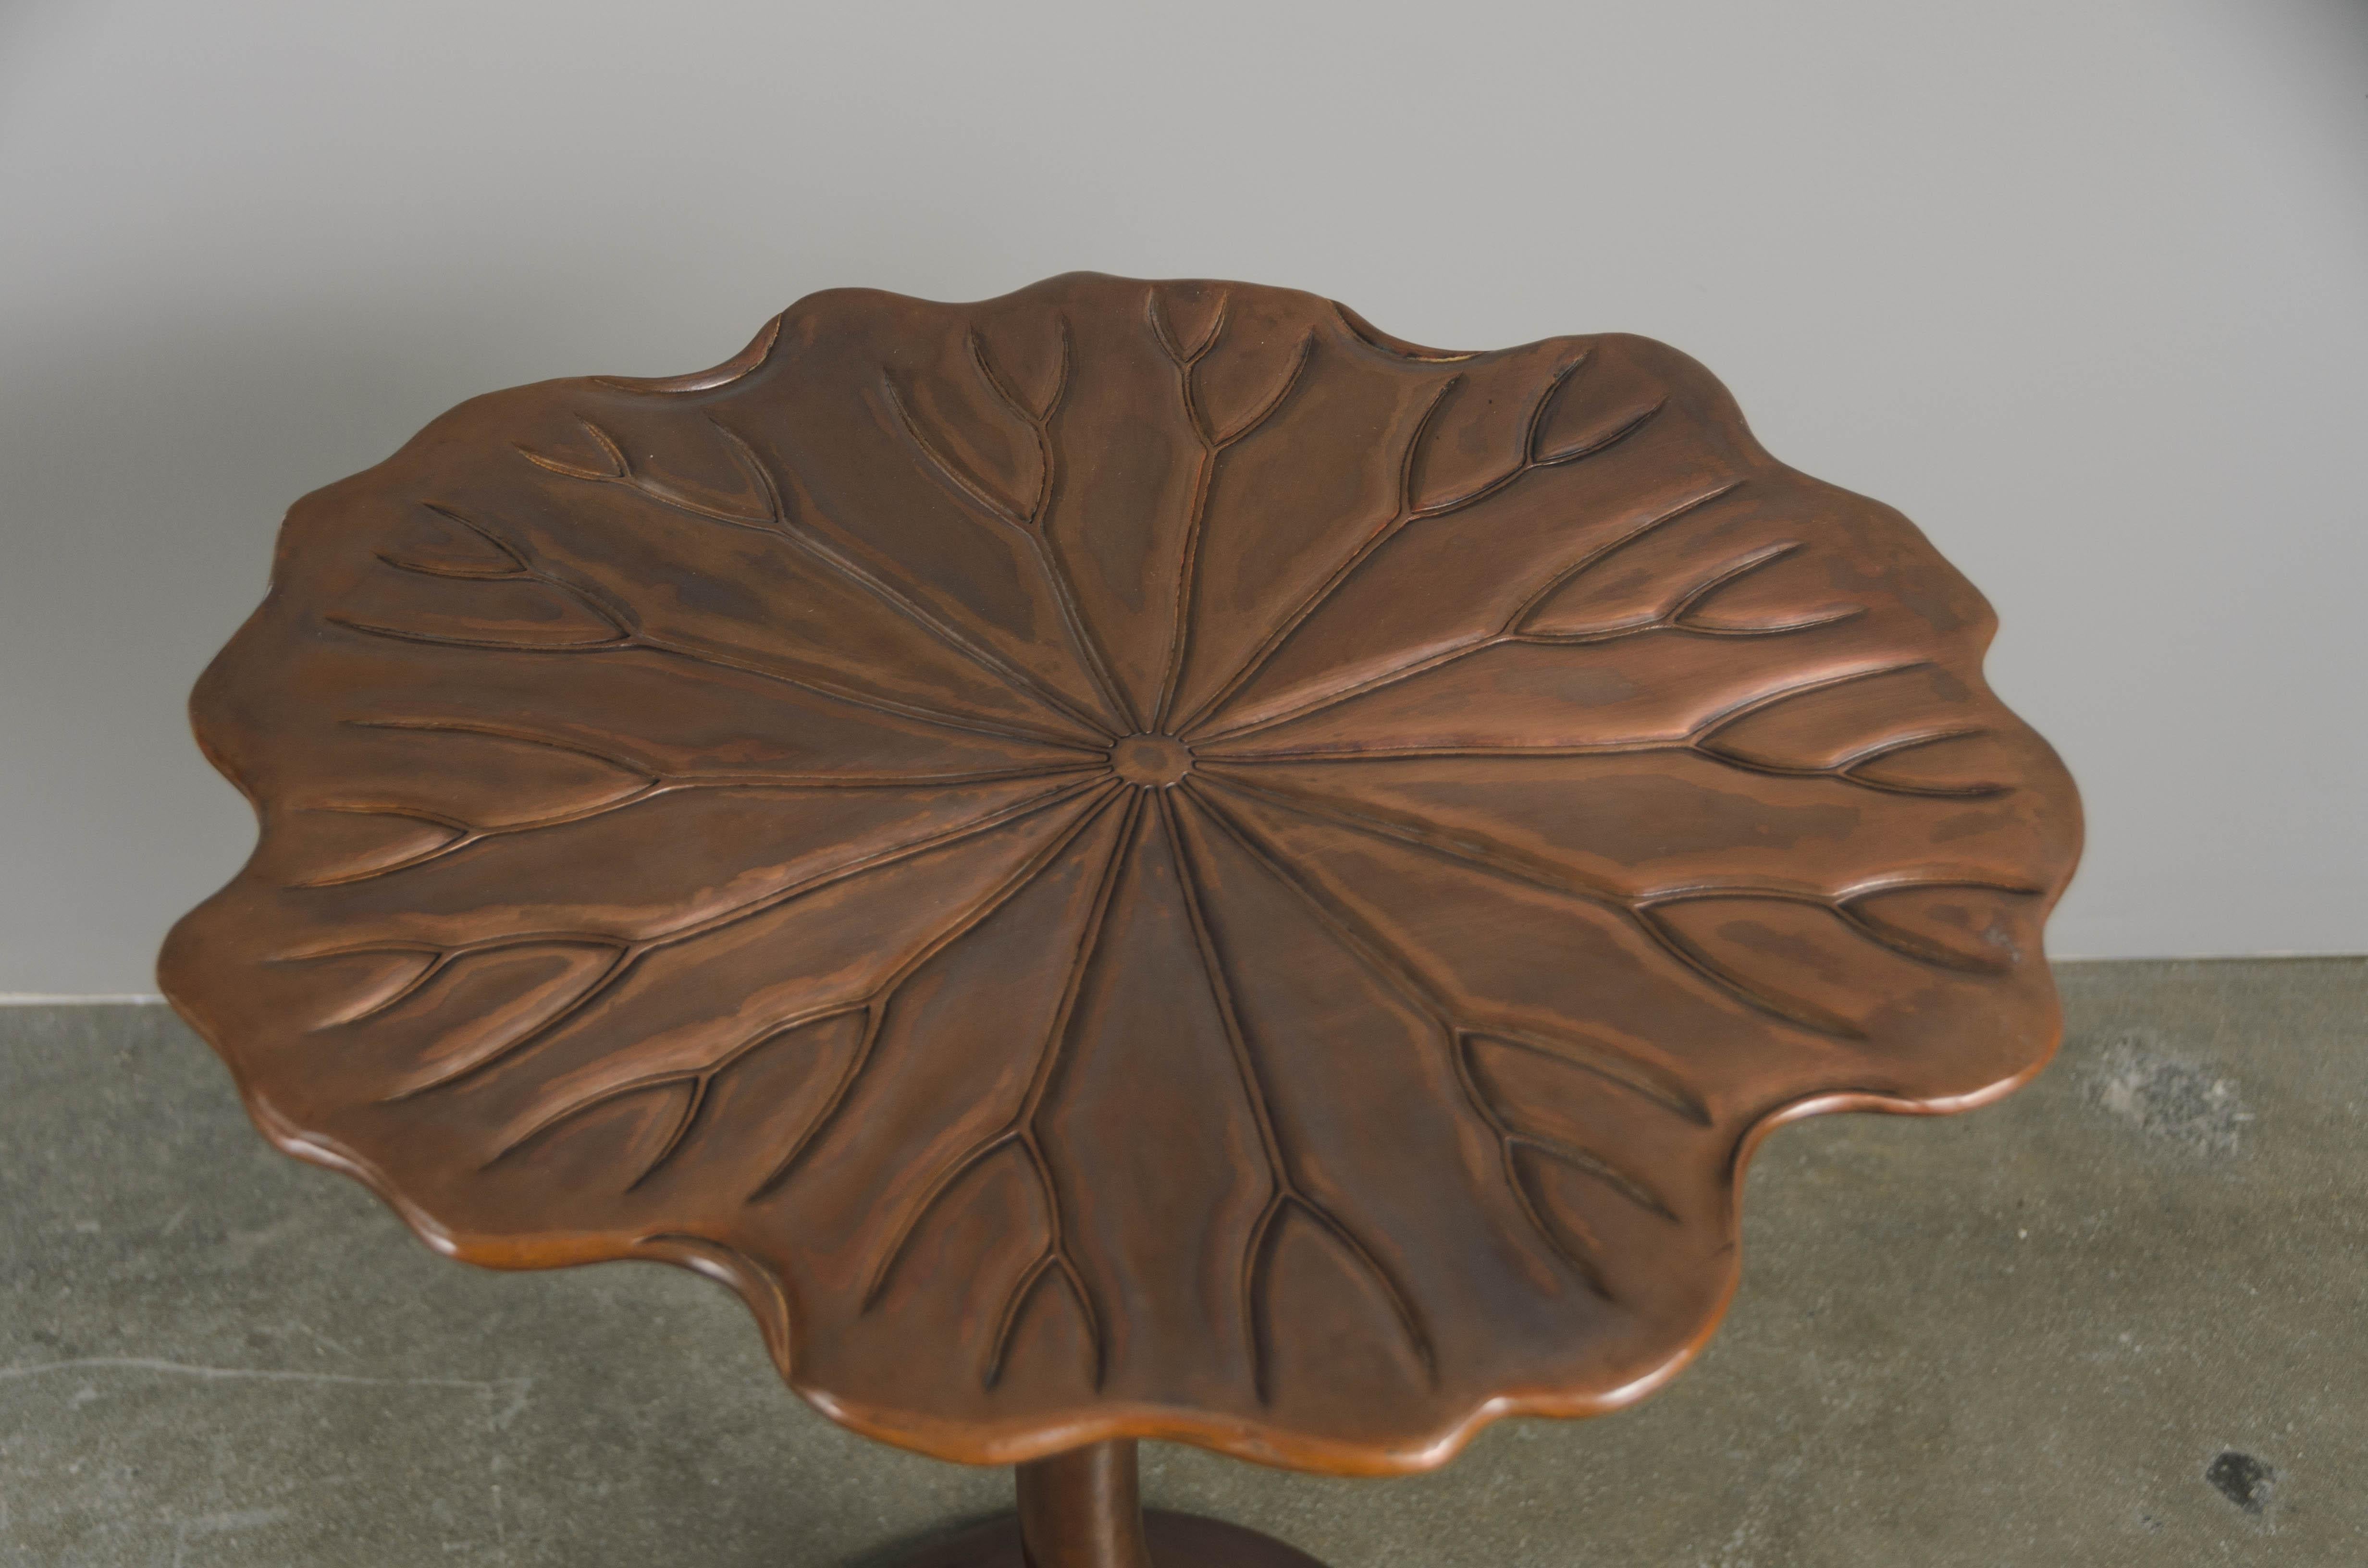 Repoussé Water Lily Table in Antique Copper by Robert Kuo, Contemporary, Limited Edition For Sale